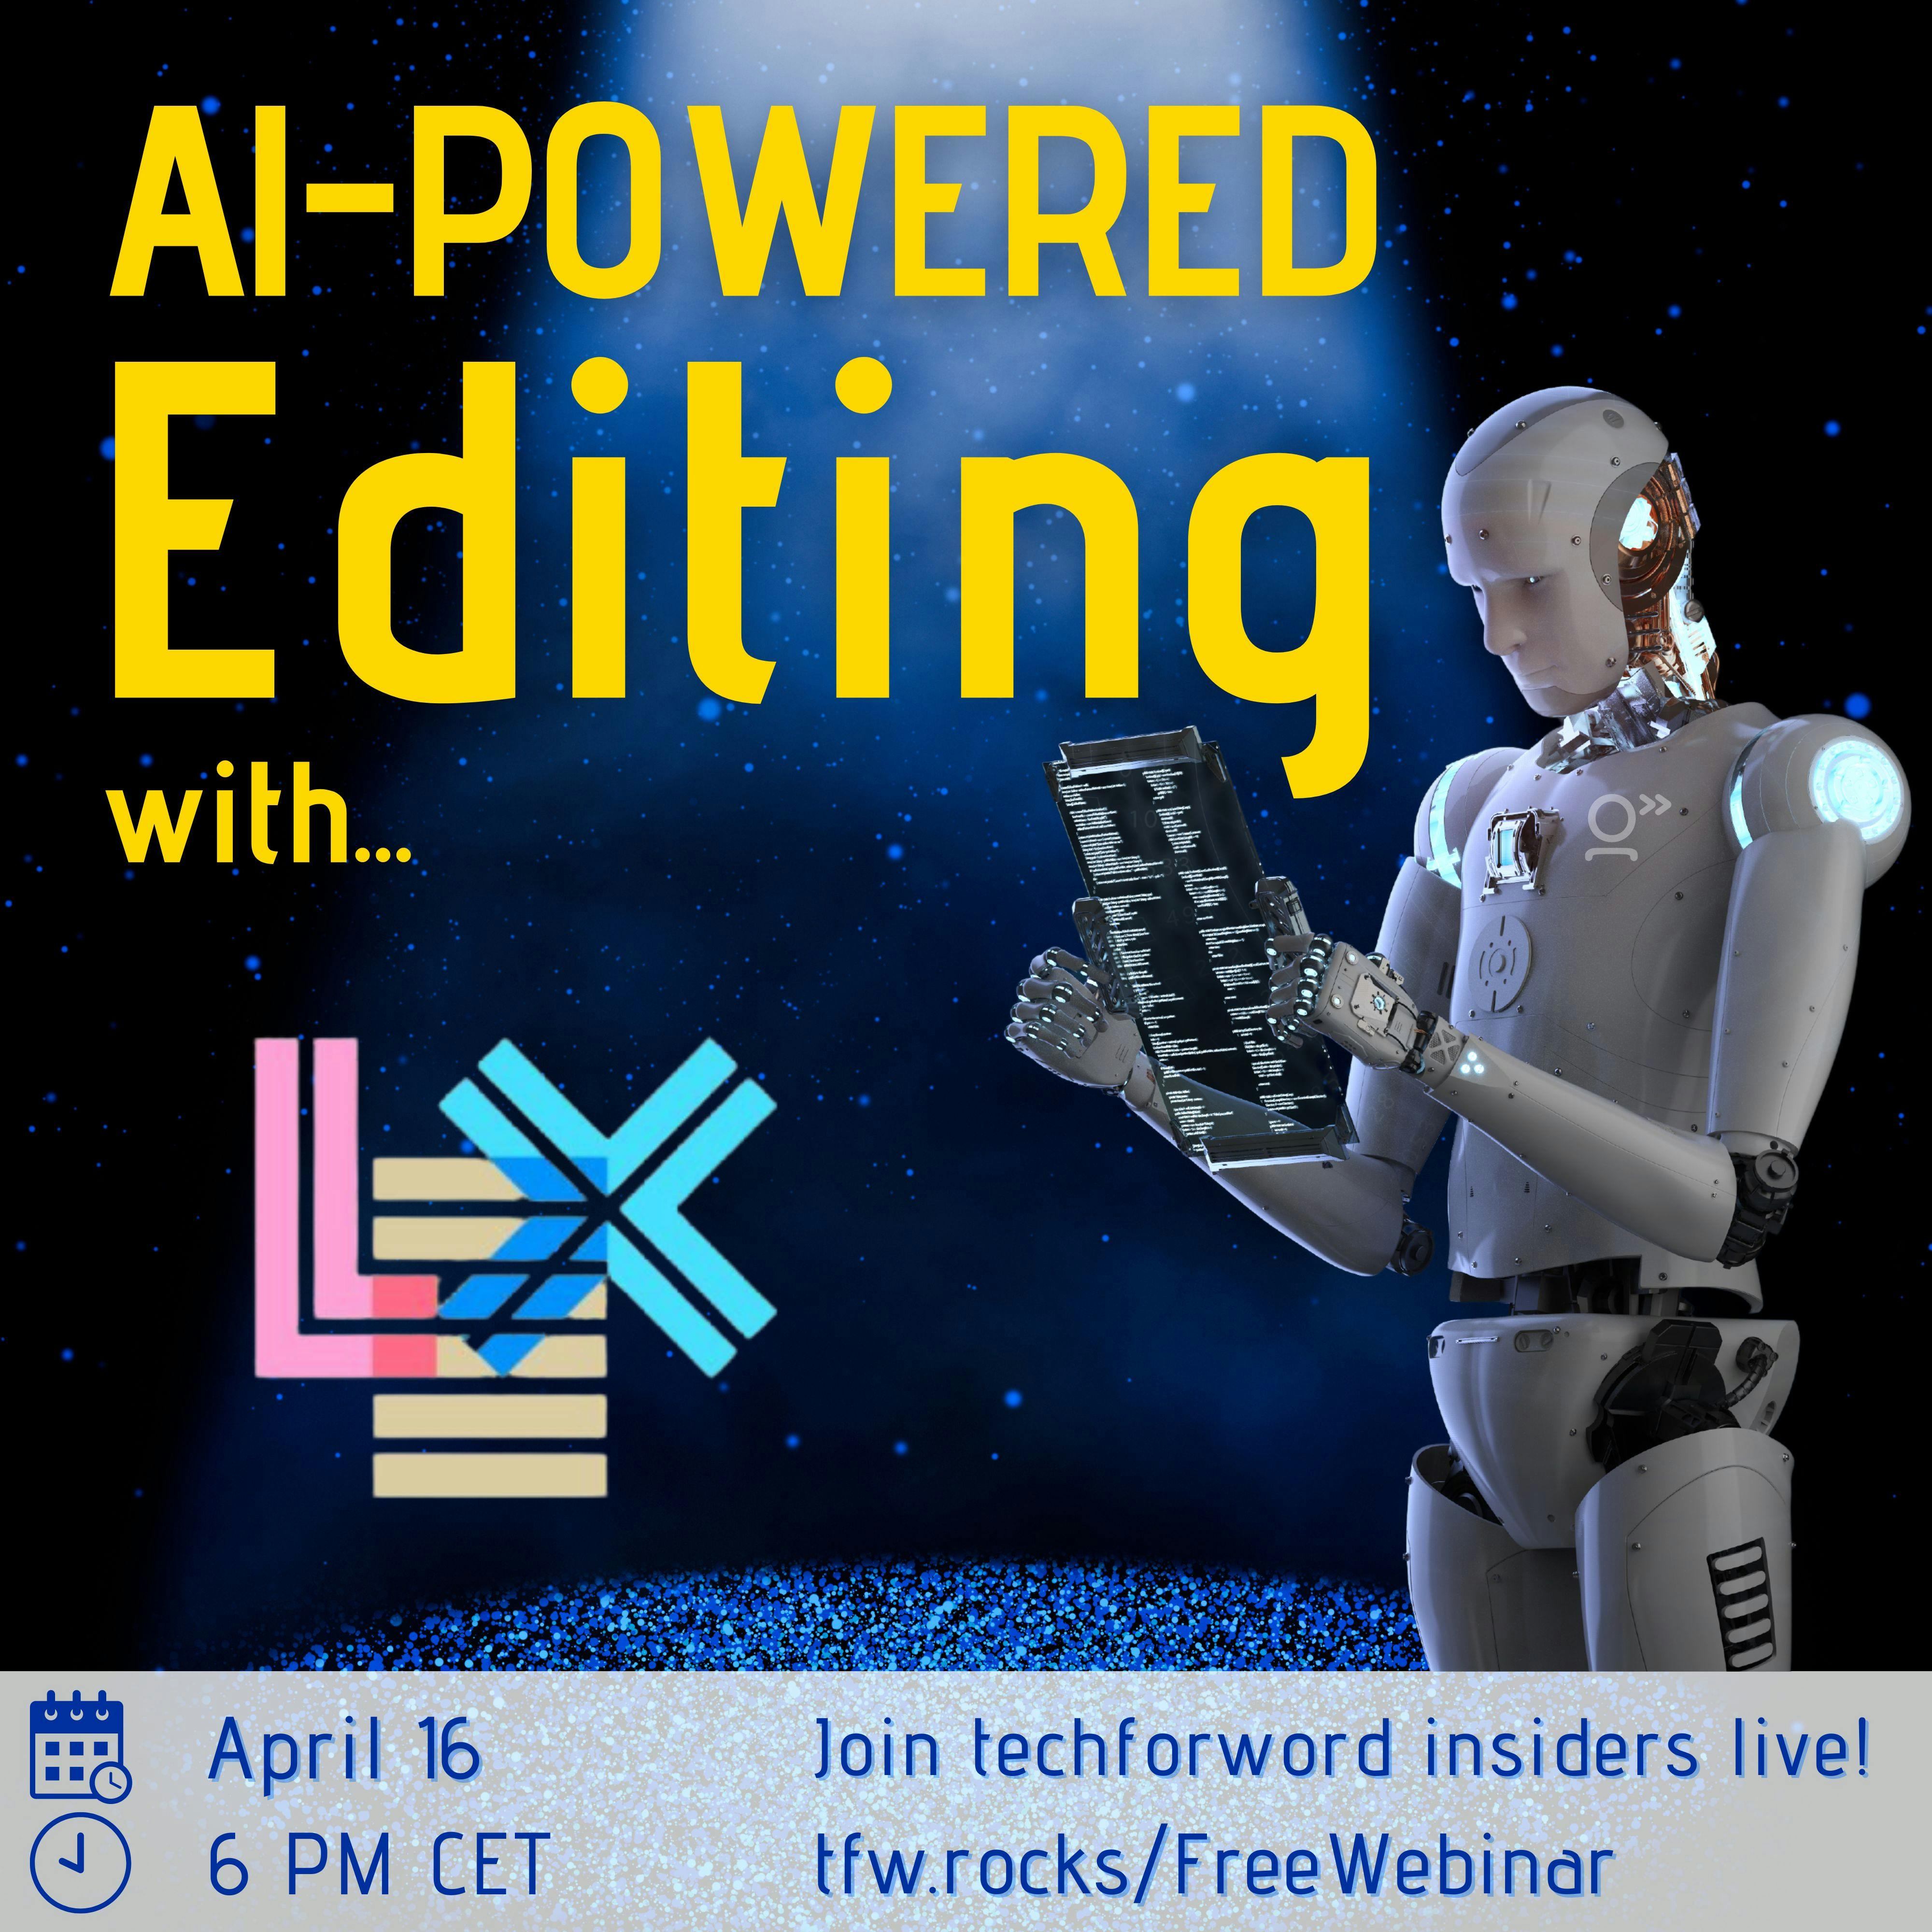 Square image. Dark blue background. Robot with GPT logo typing on a laptop. The Title reads: “Get ChatGPT to write your emails”. At the bottom of the image we have the date and time, i.e. March 20 at 6 PM CET and the techforword logo.